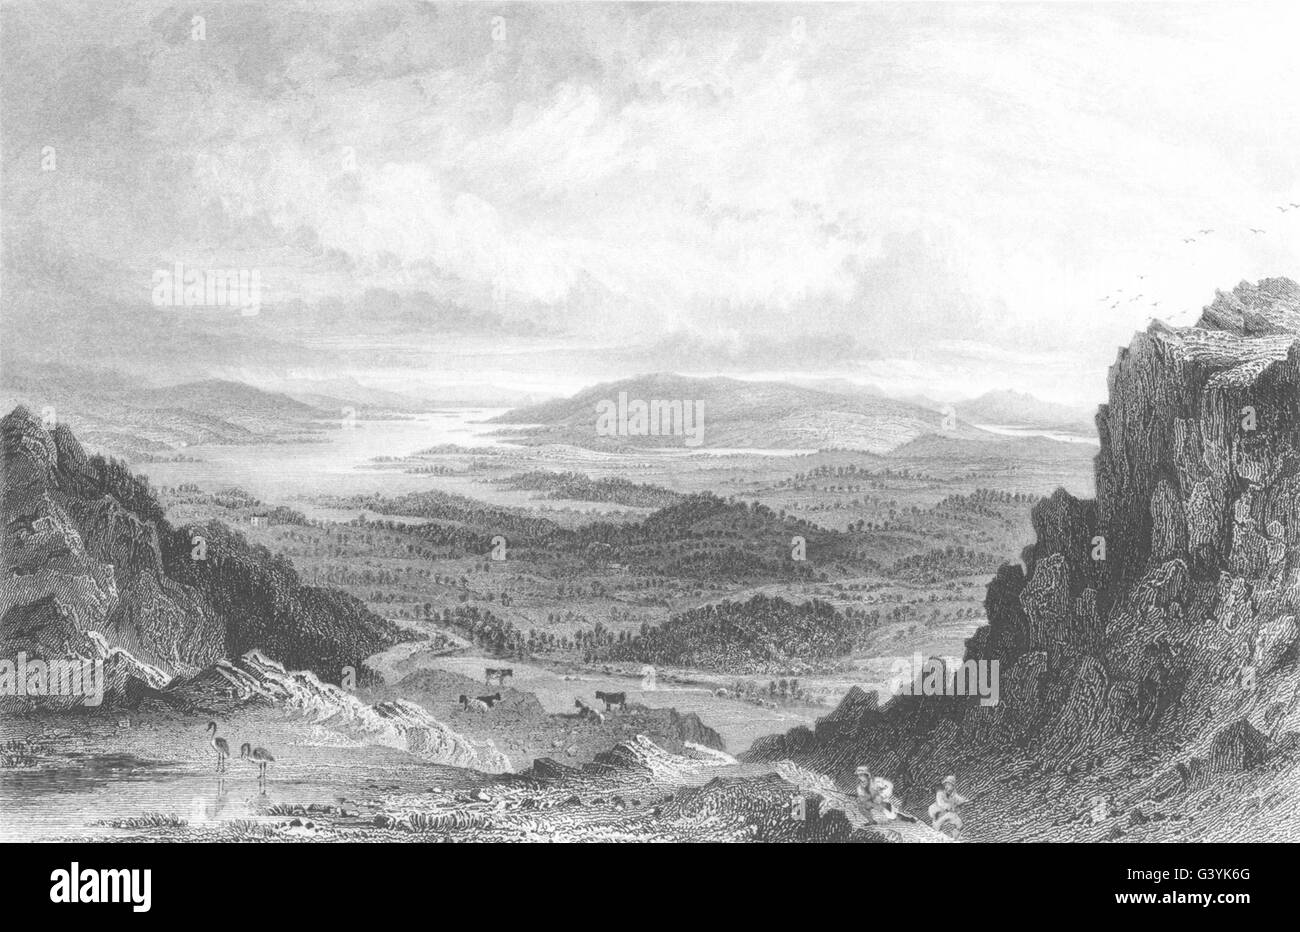 CUMBRIA: Windermere, Esthwaite & Coniston Lakes, from Loughrigg Fell, 1832 Stock Photo